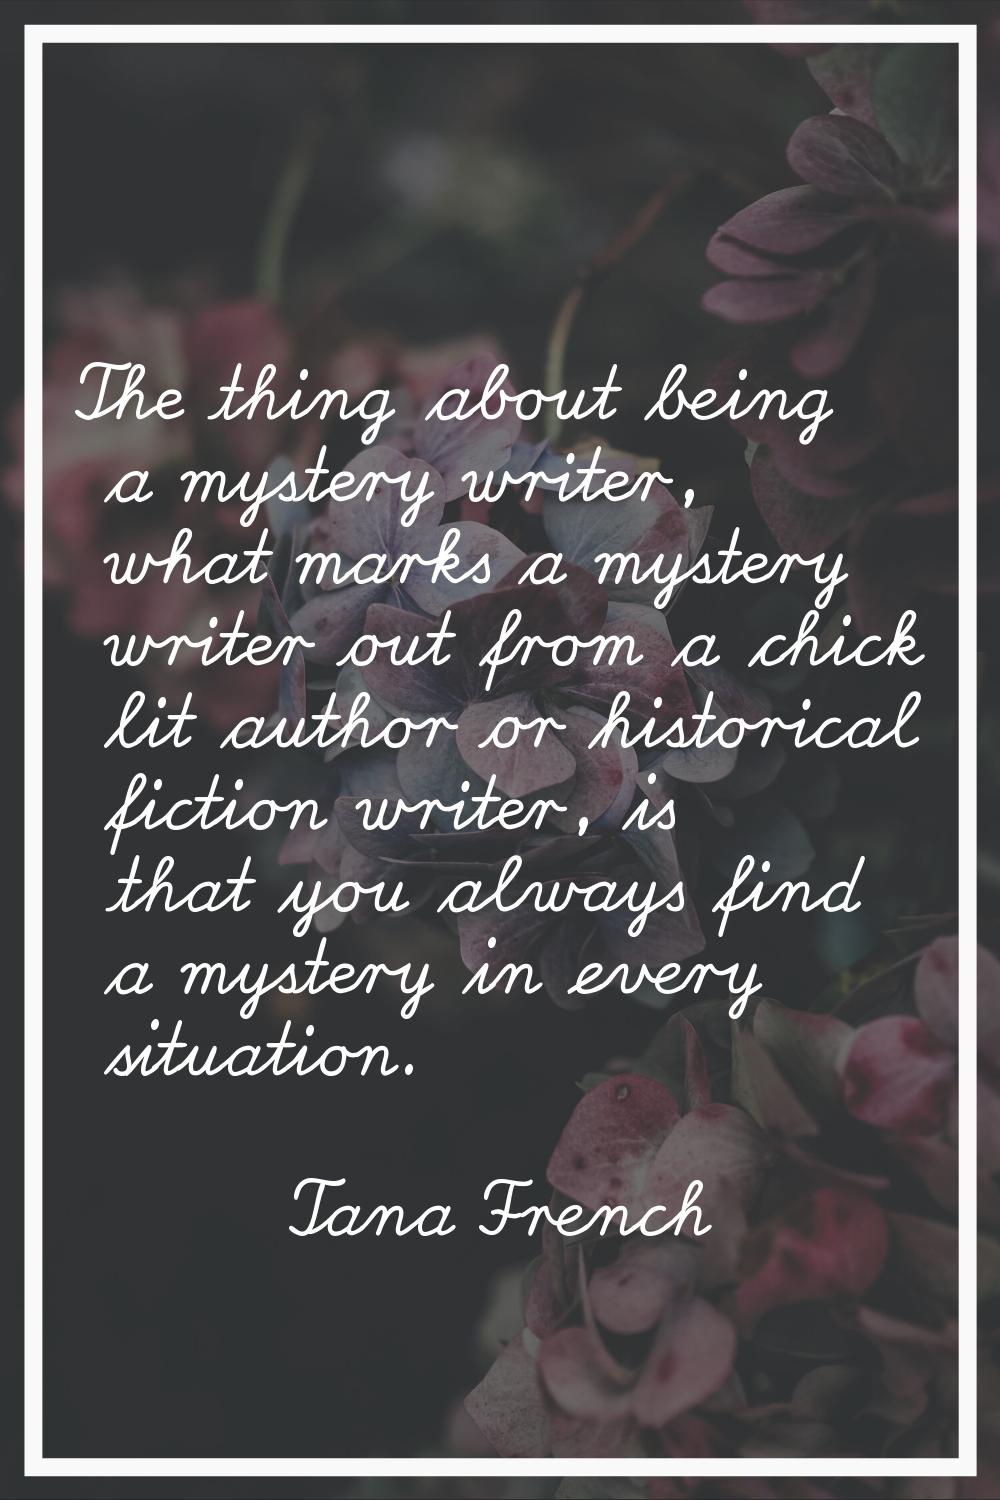 The thing about being a mystery writer, what marks a mystery writer out from a chick lit author or 